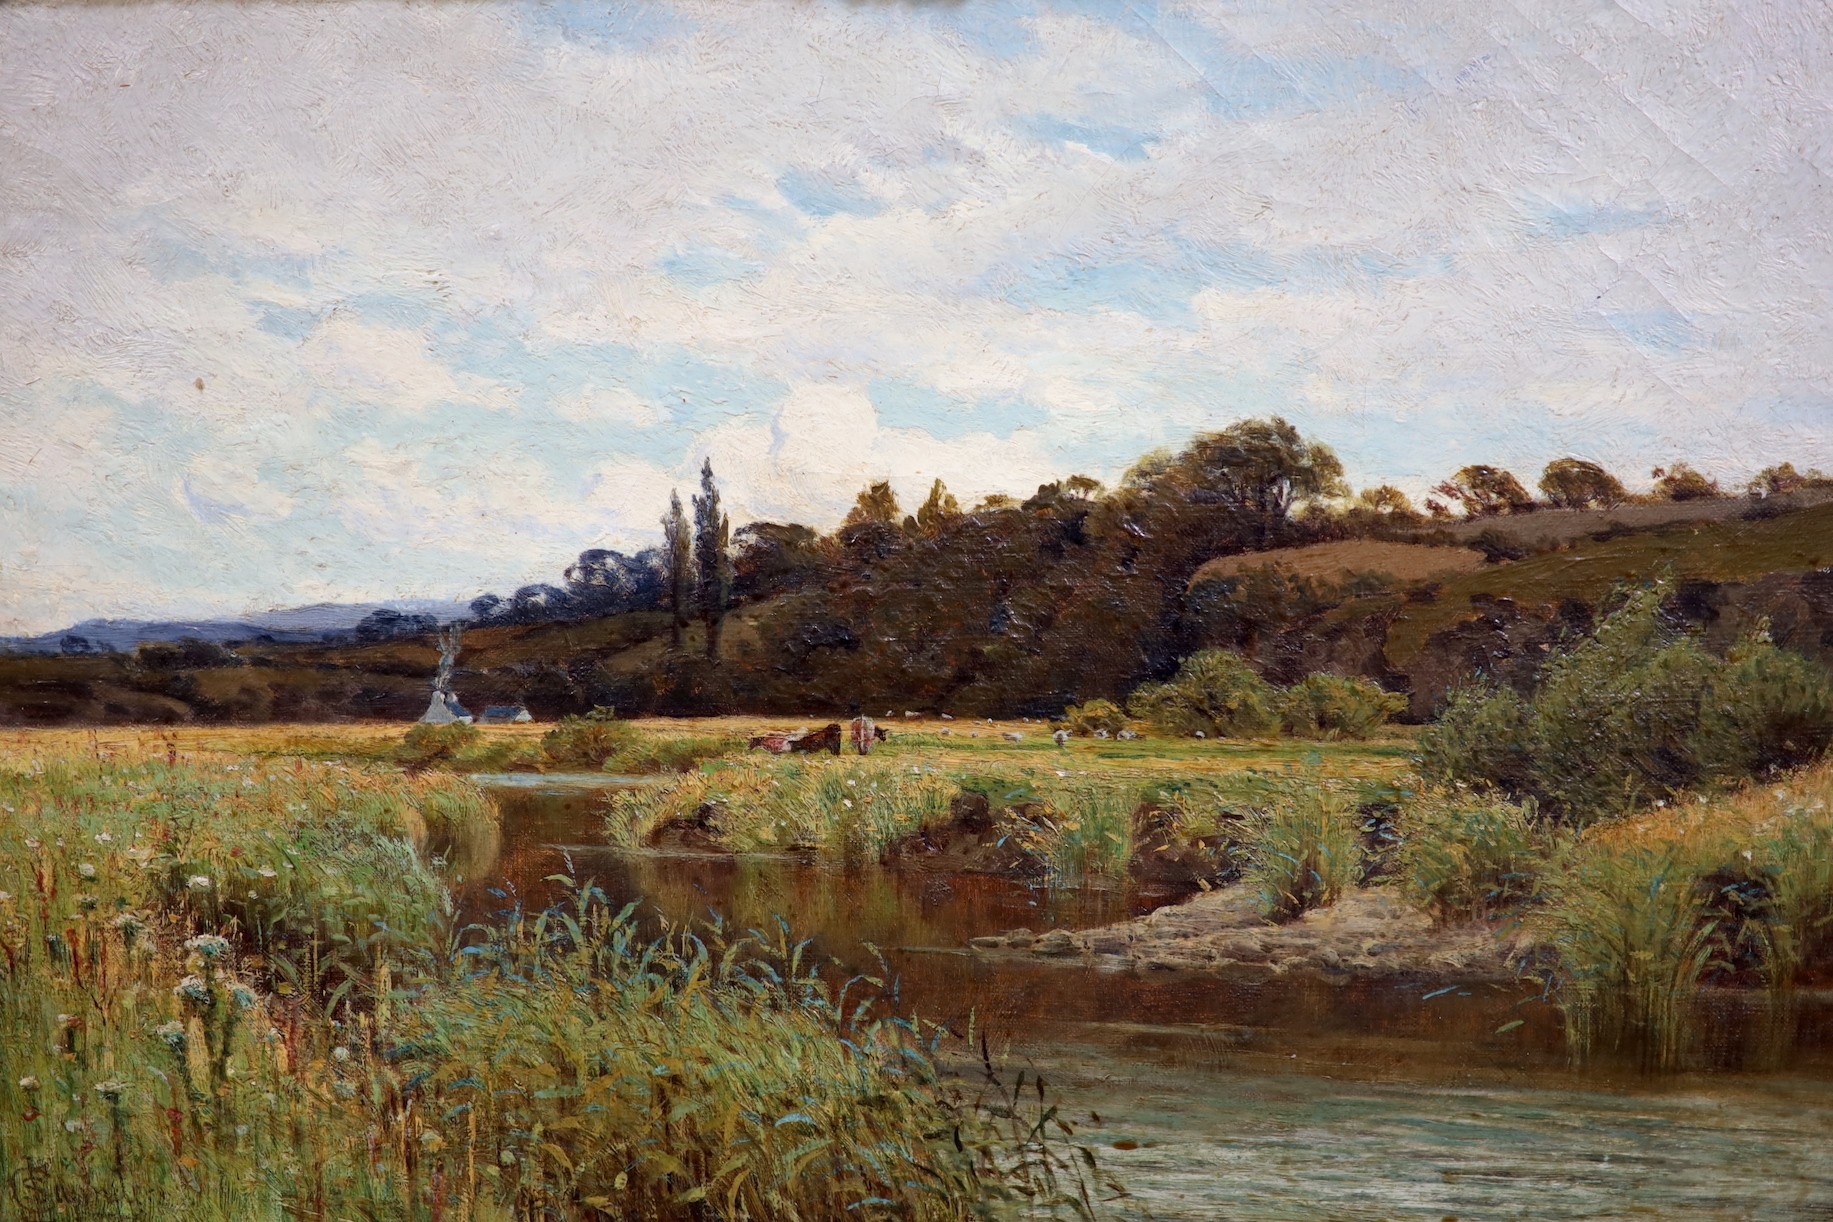 Charles L. Saunders (British, c.1855-1915), 'Summertime on the Llugwy, North Wales', oil on canvas, 40 x 60cm                                                                                                               